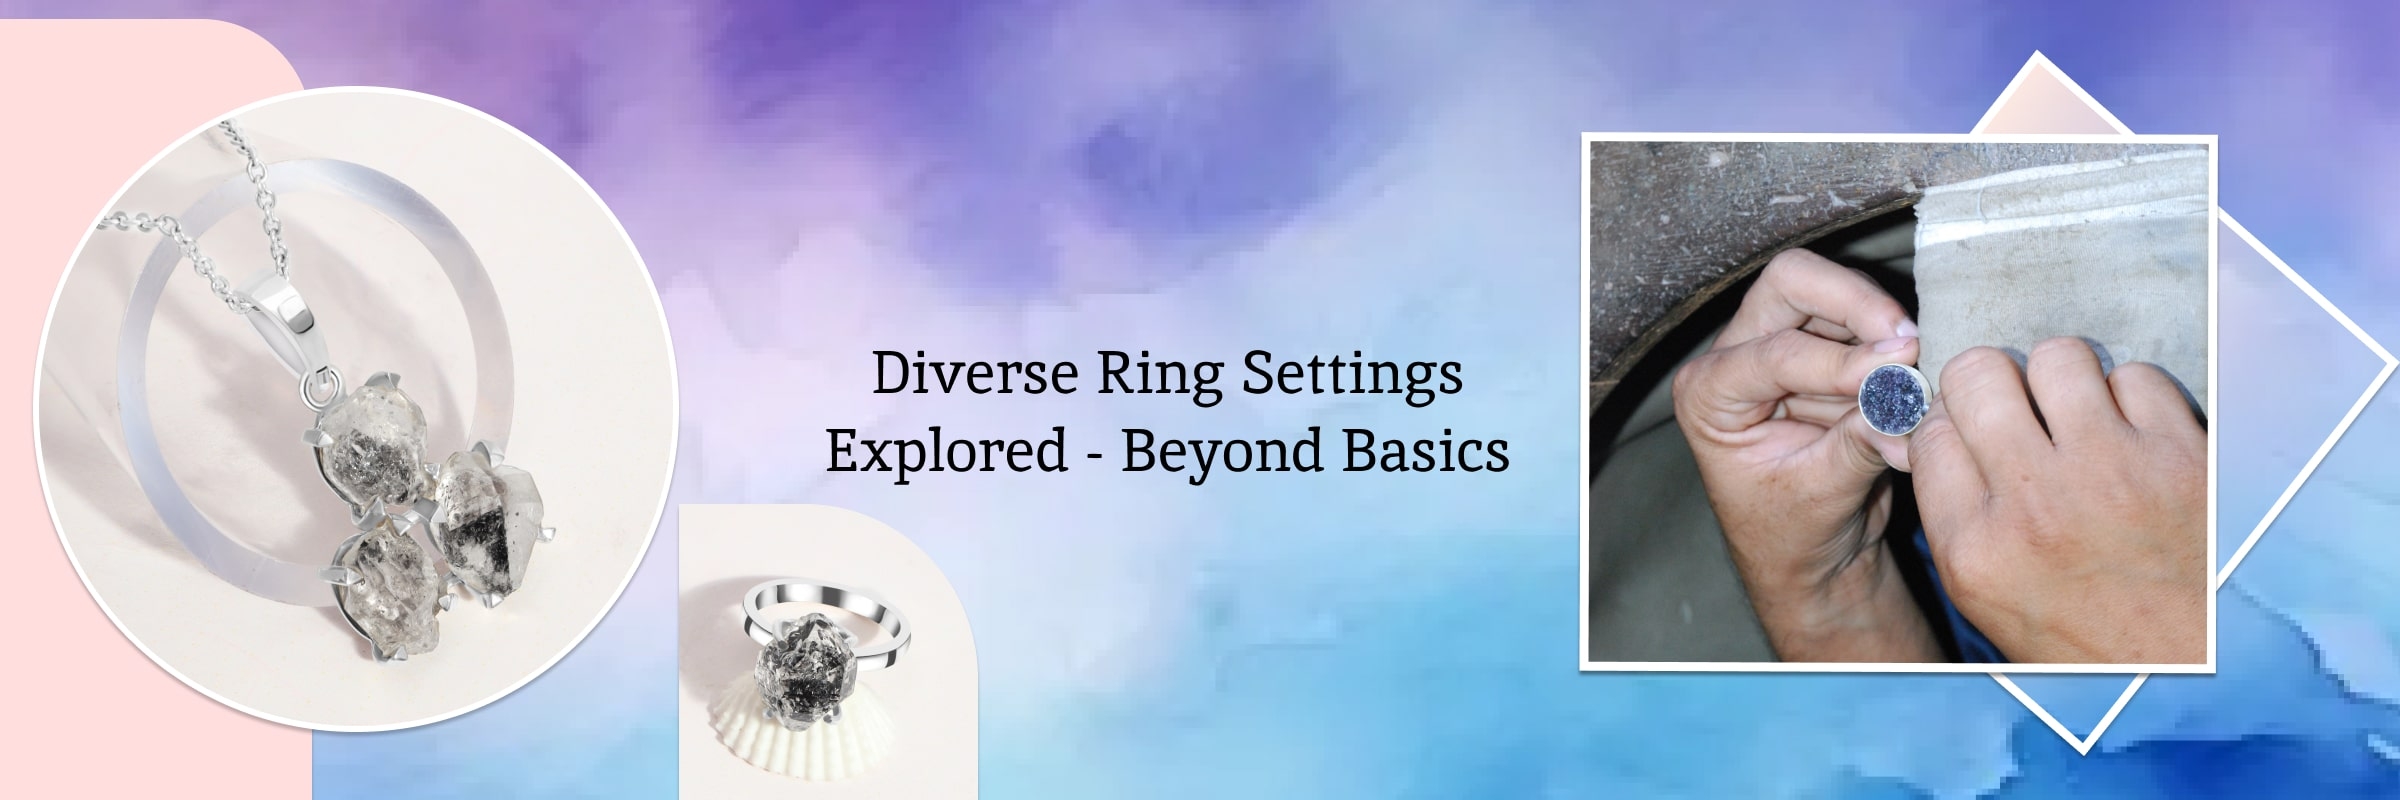 Exploring Other Ring Settings: